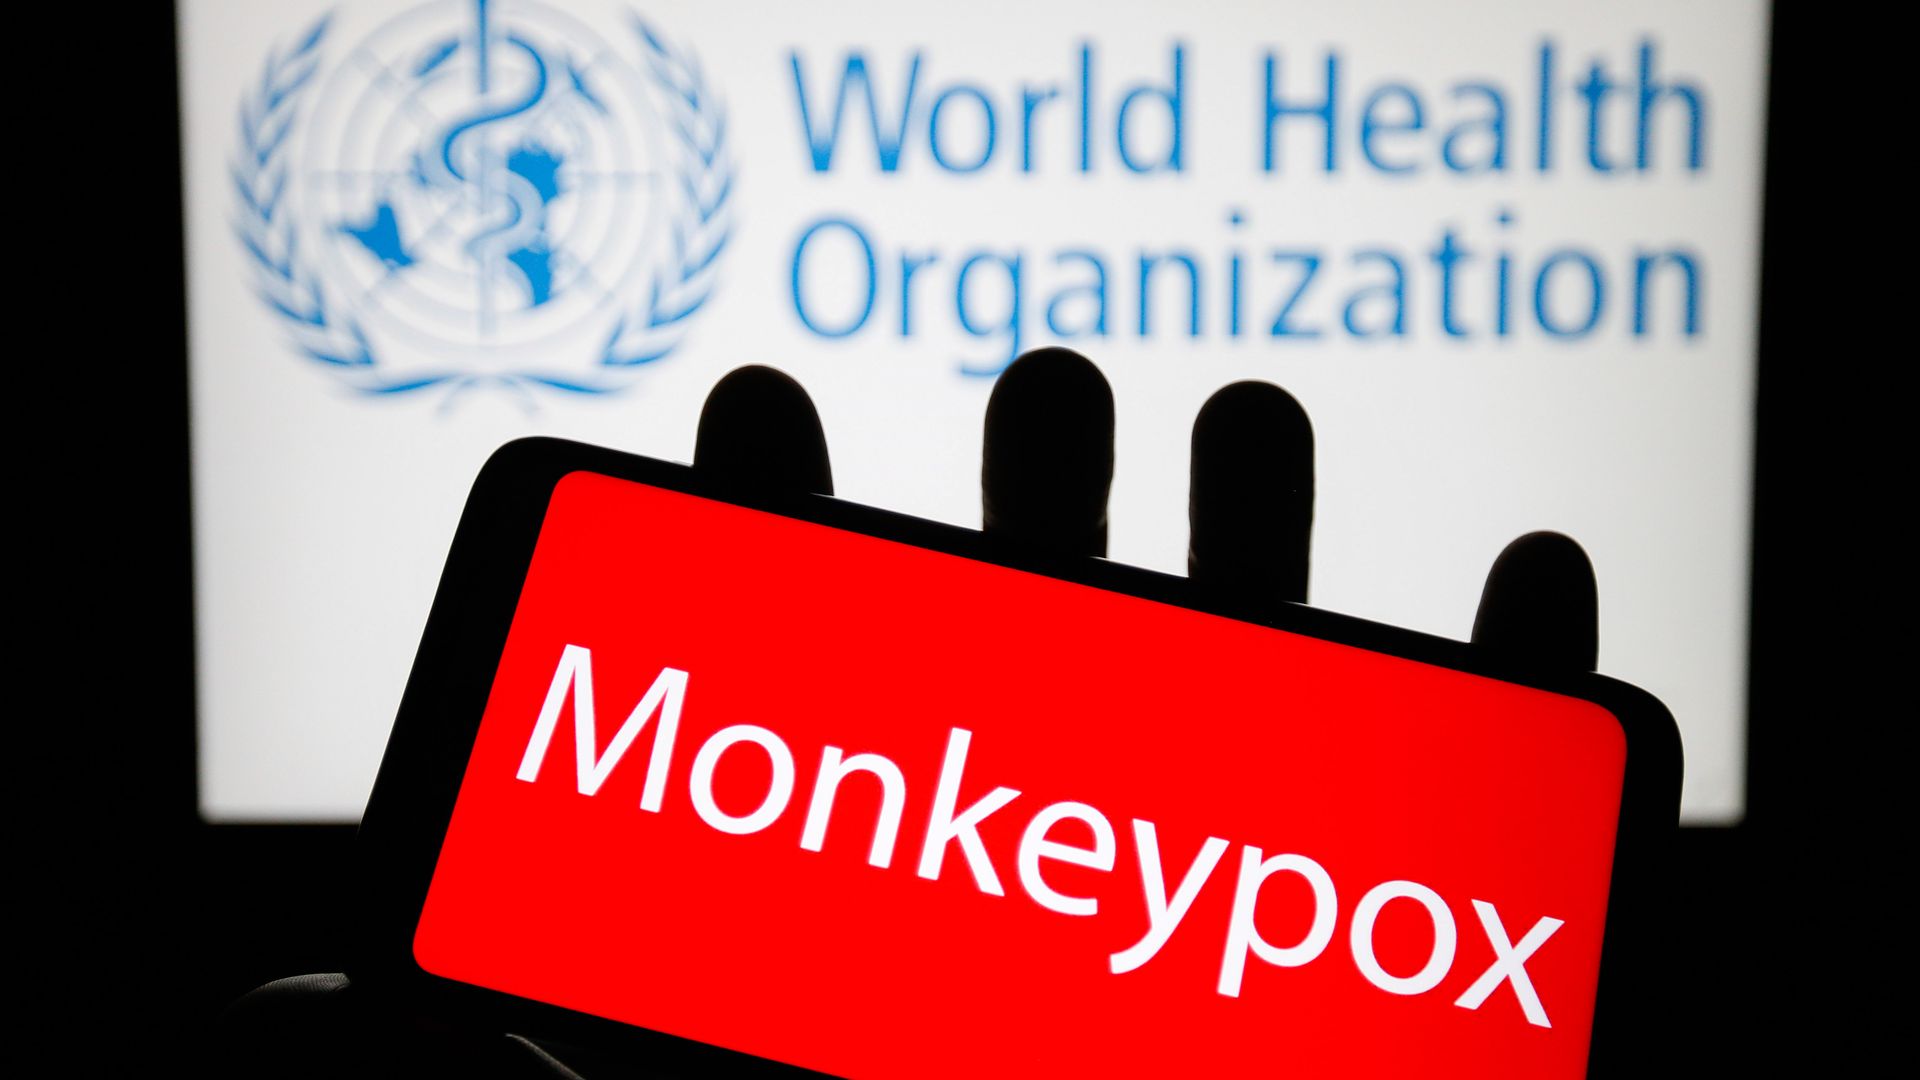 Photo of the word Monkeypox on the screen of a smartphone with the World Health Organization (WHO) logo in the background